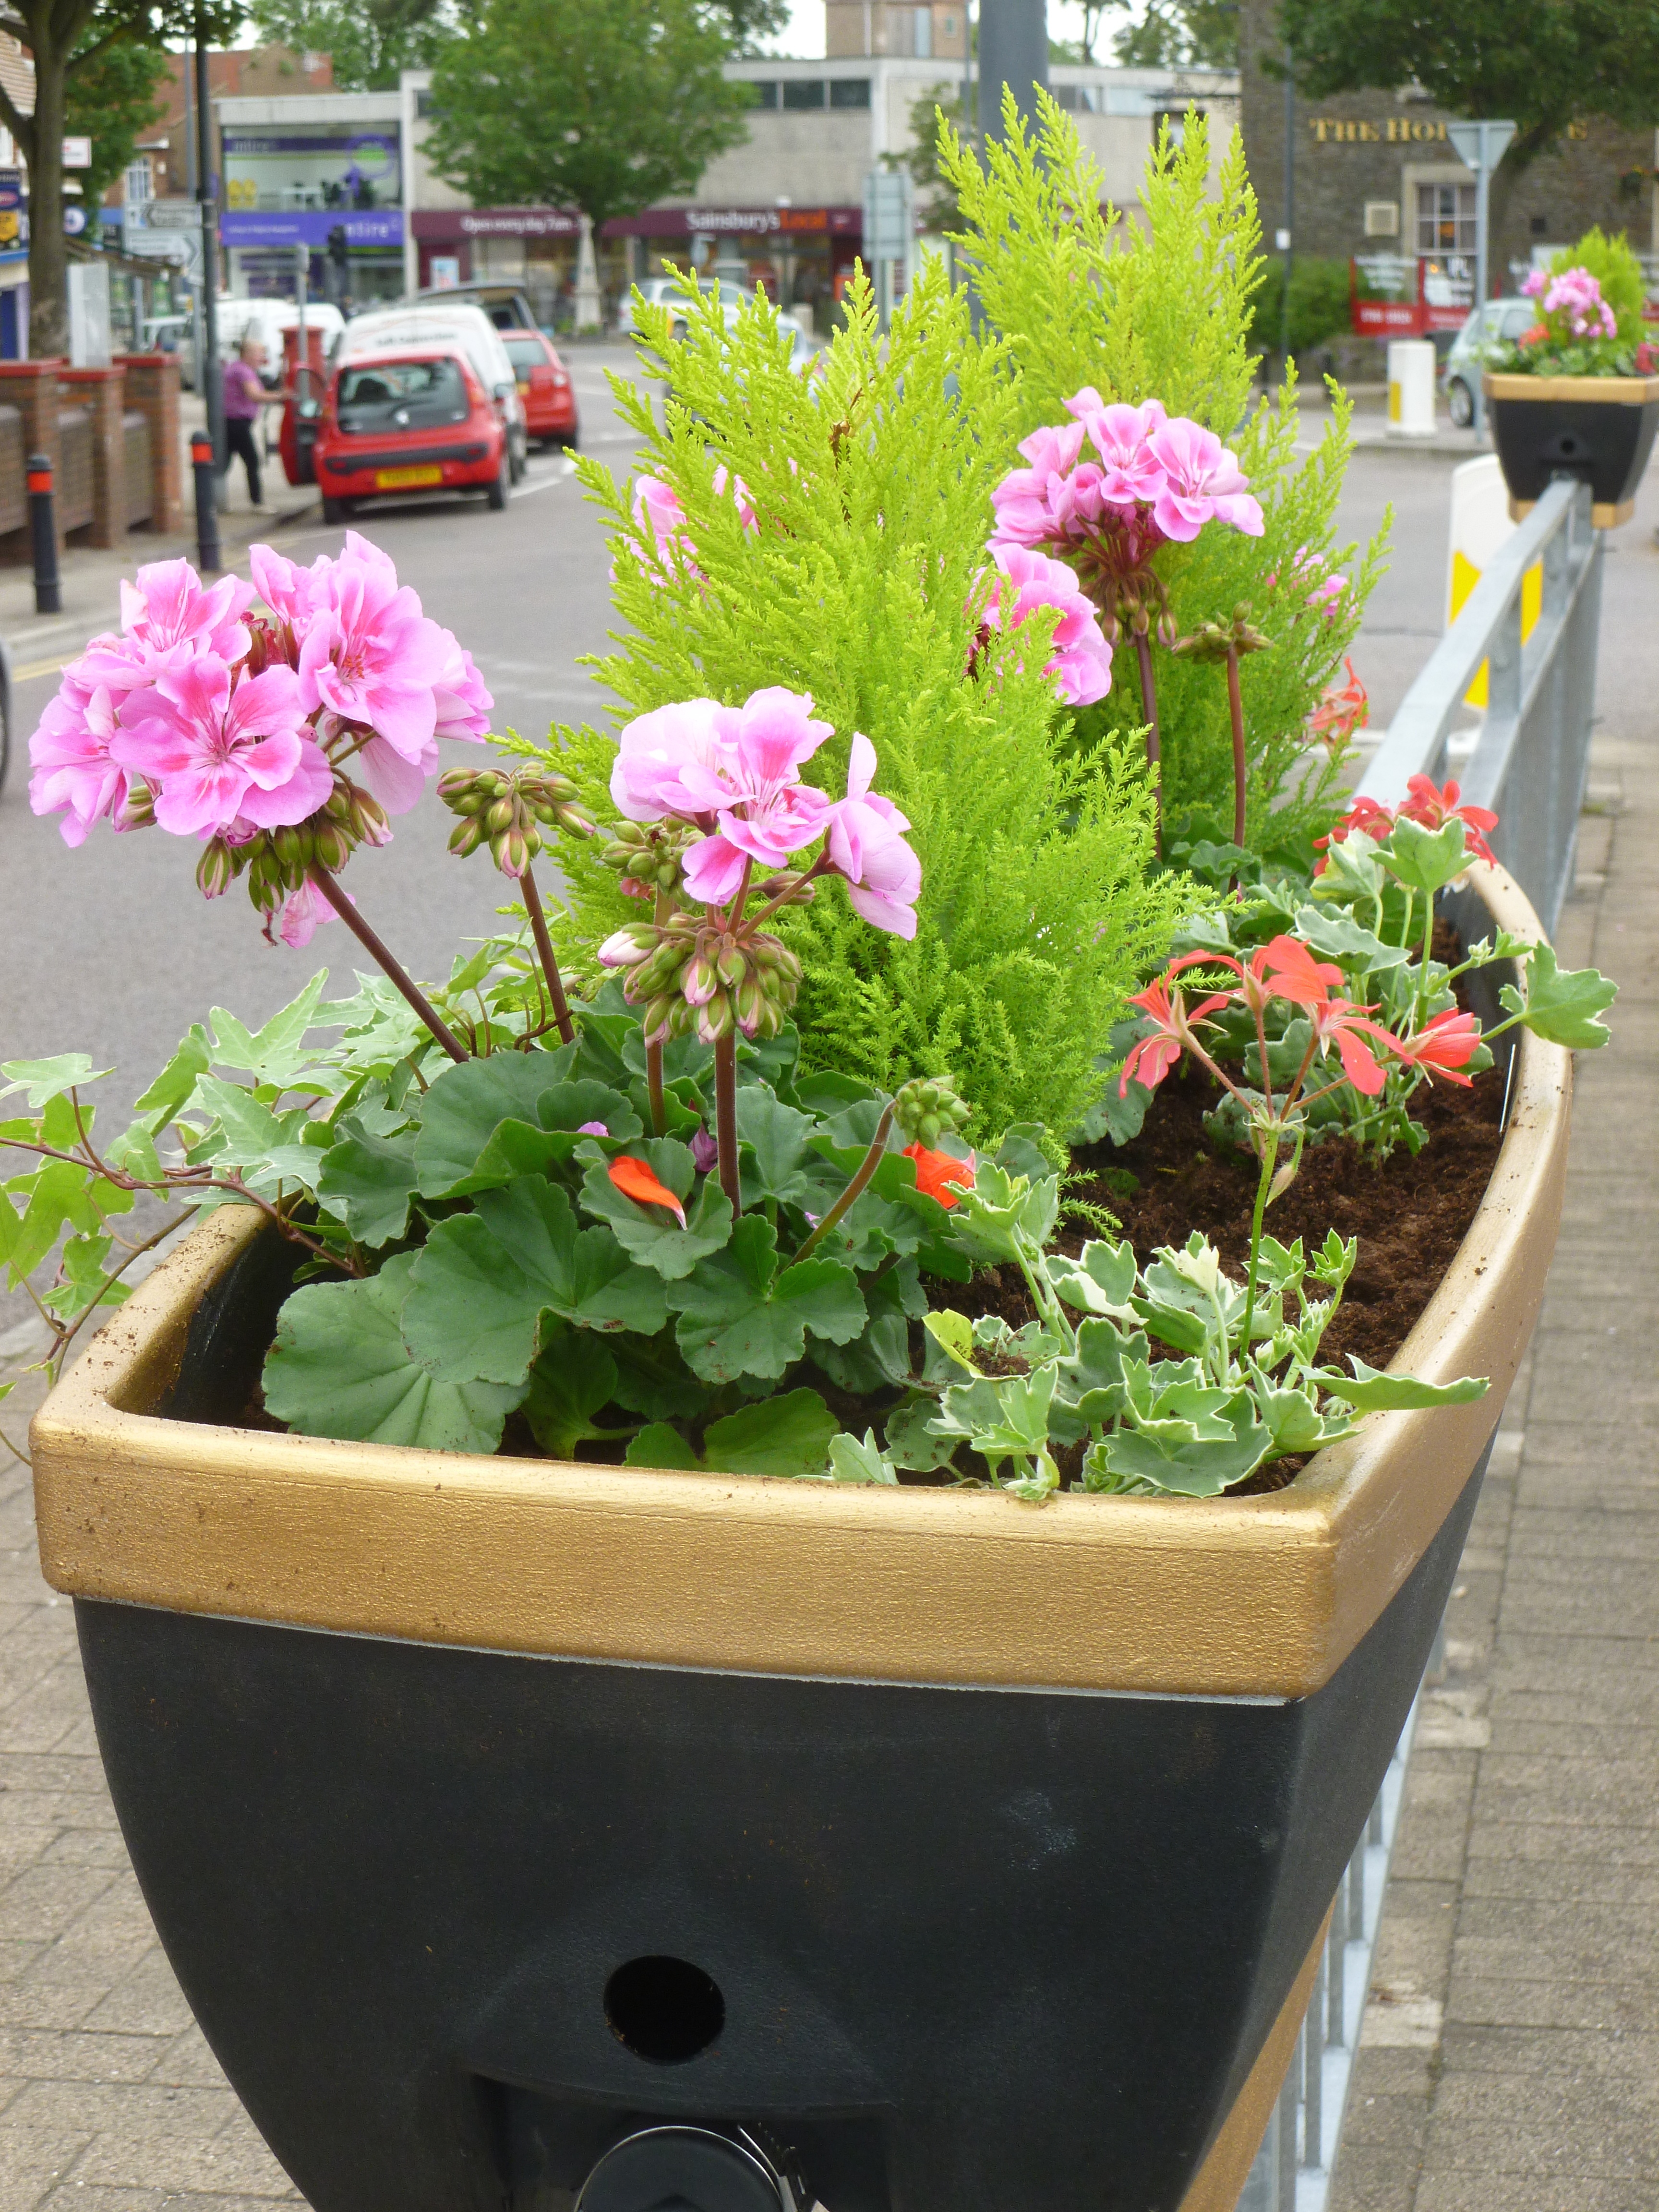 One of the planters on the railings at downend